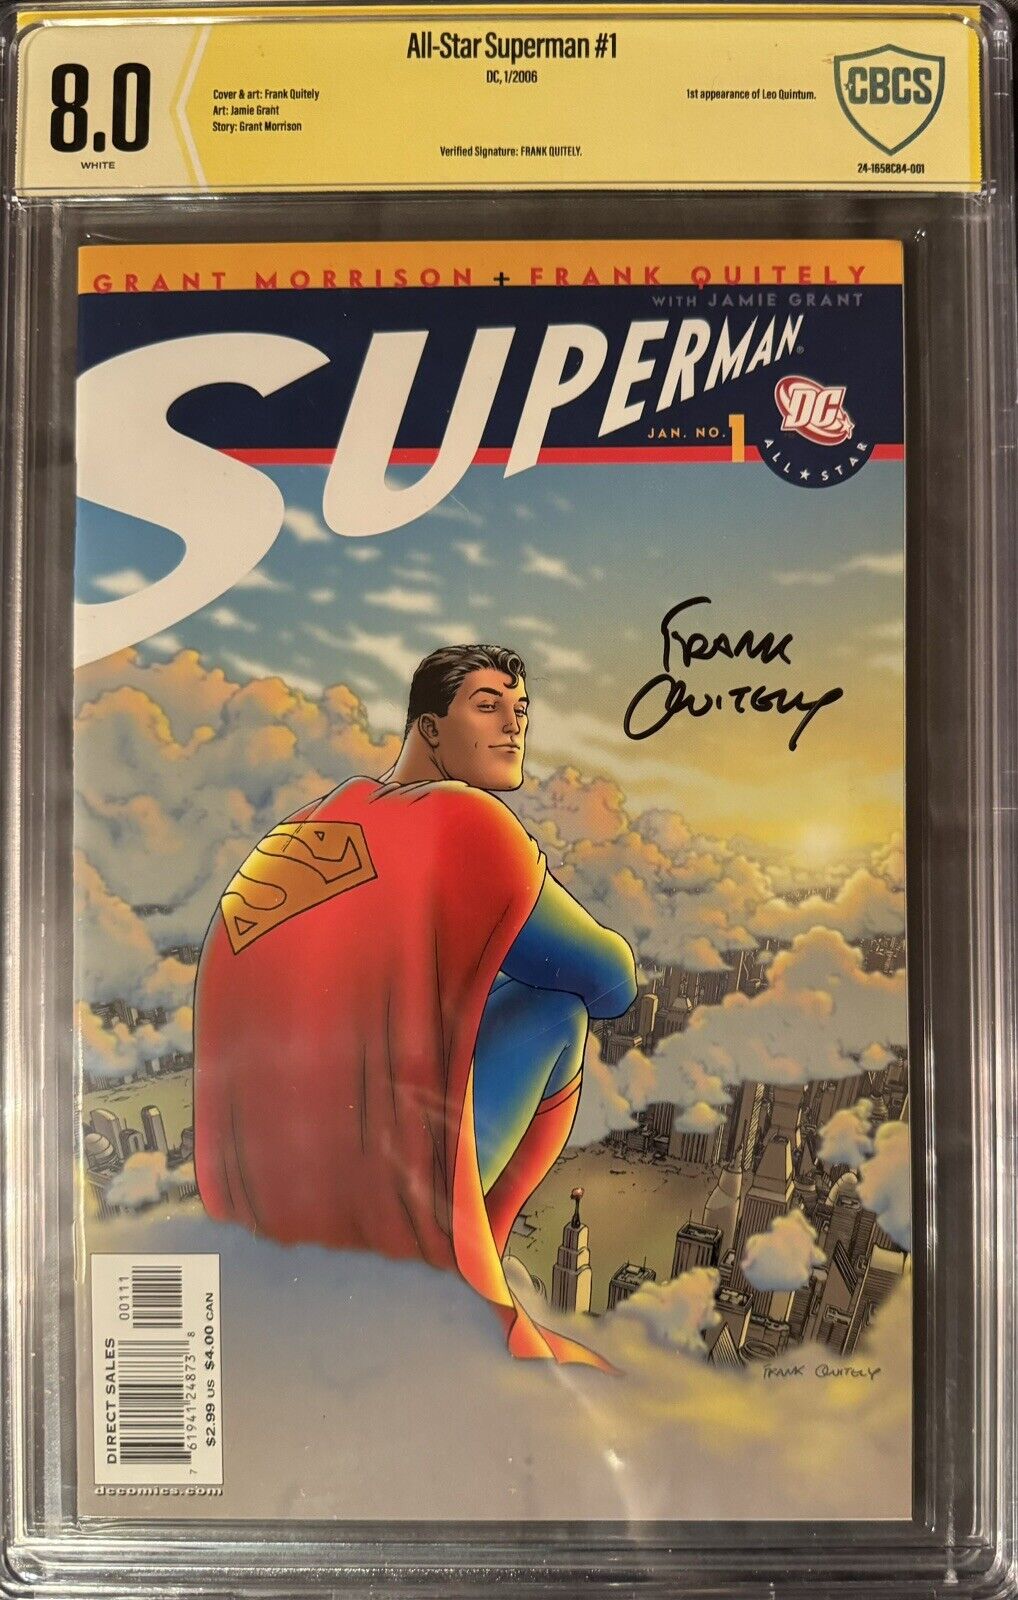 All Star Superman #1  SIGNED BY FRANK QUIETLY CBCS 8.0